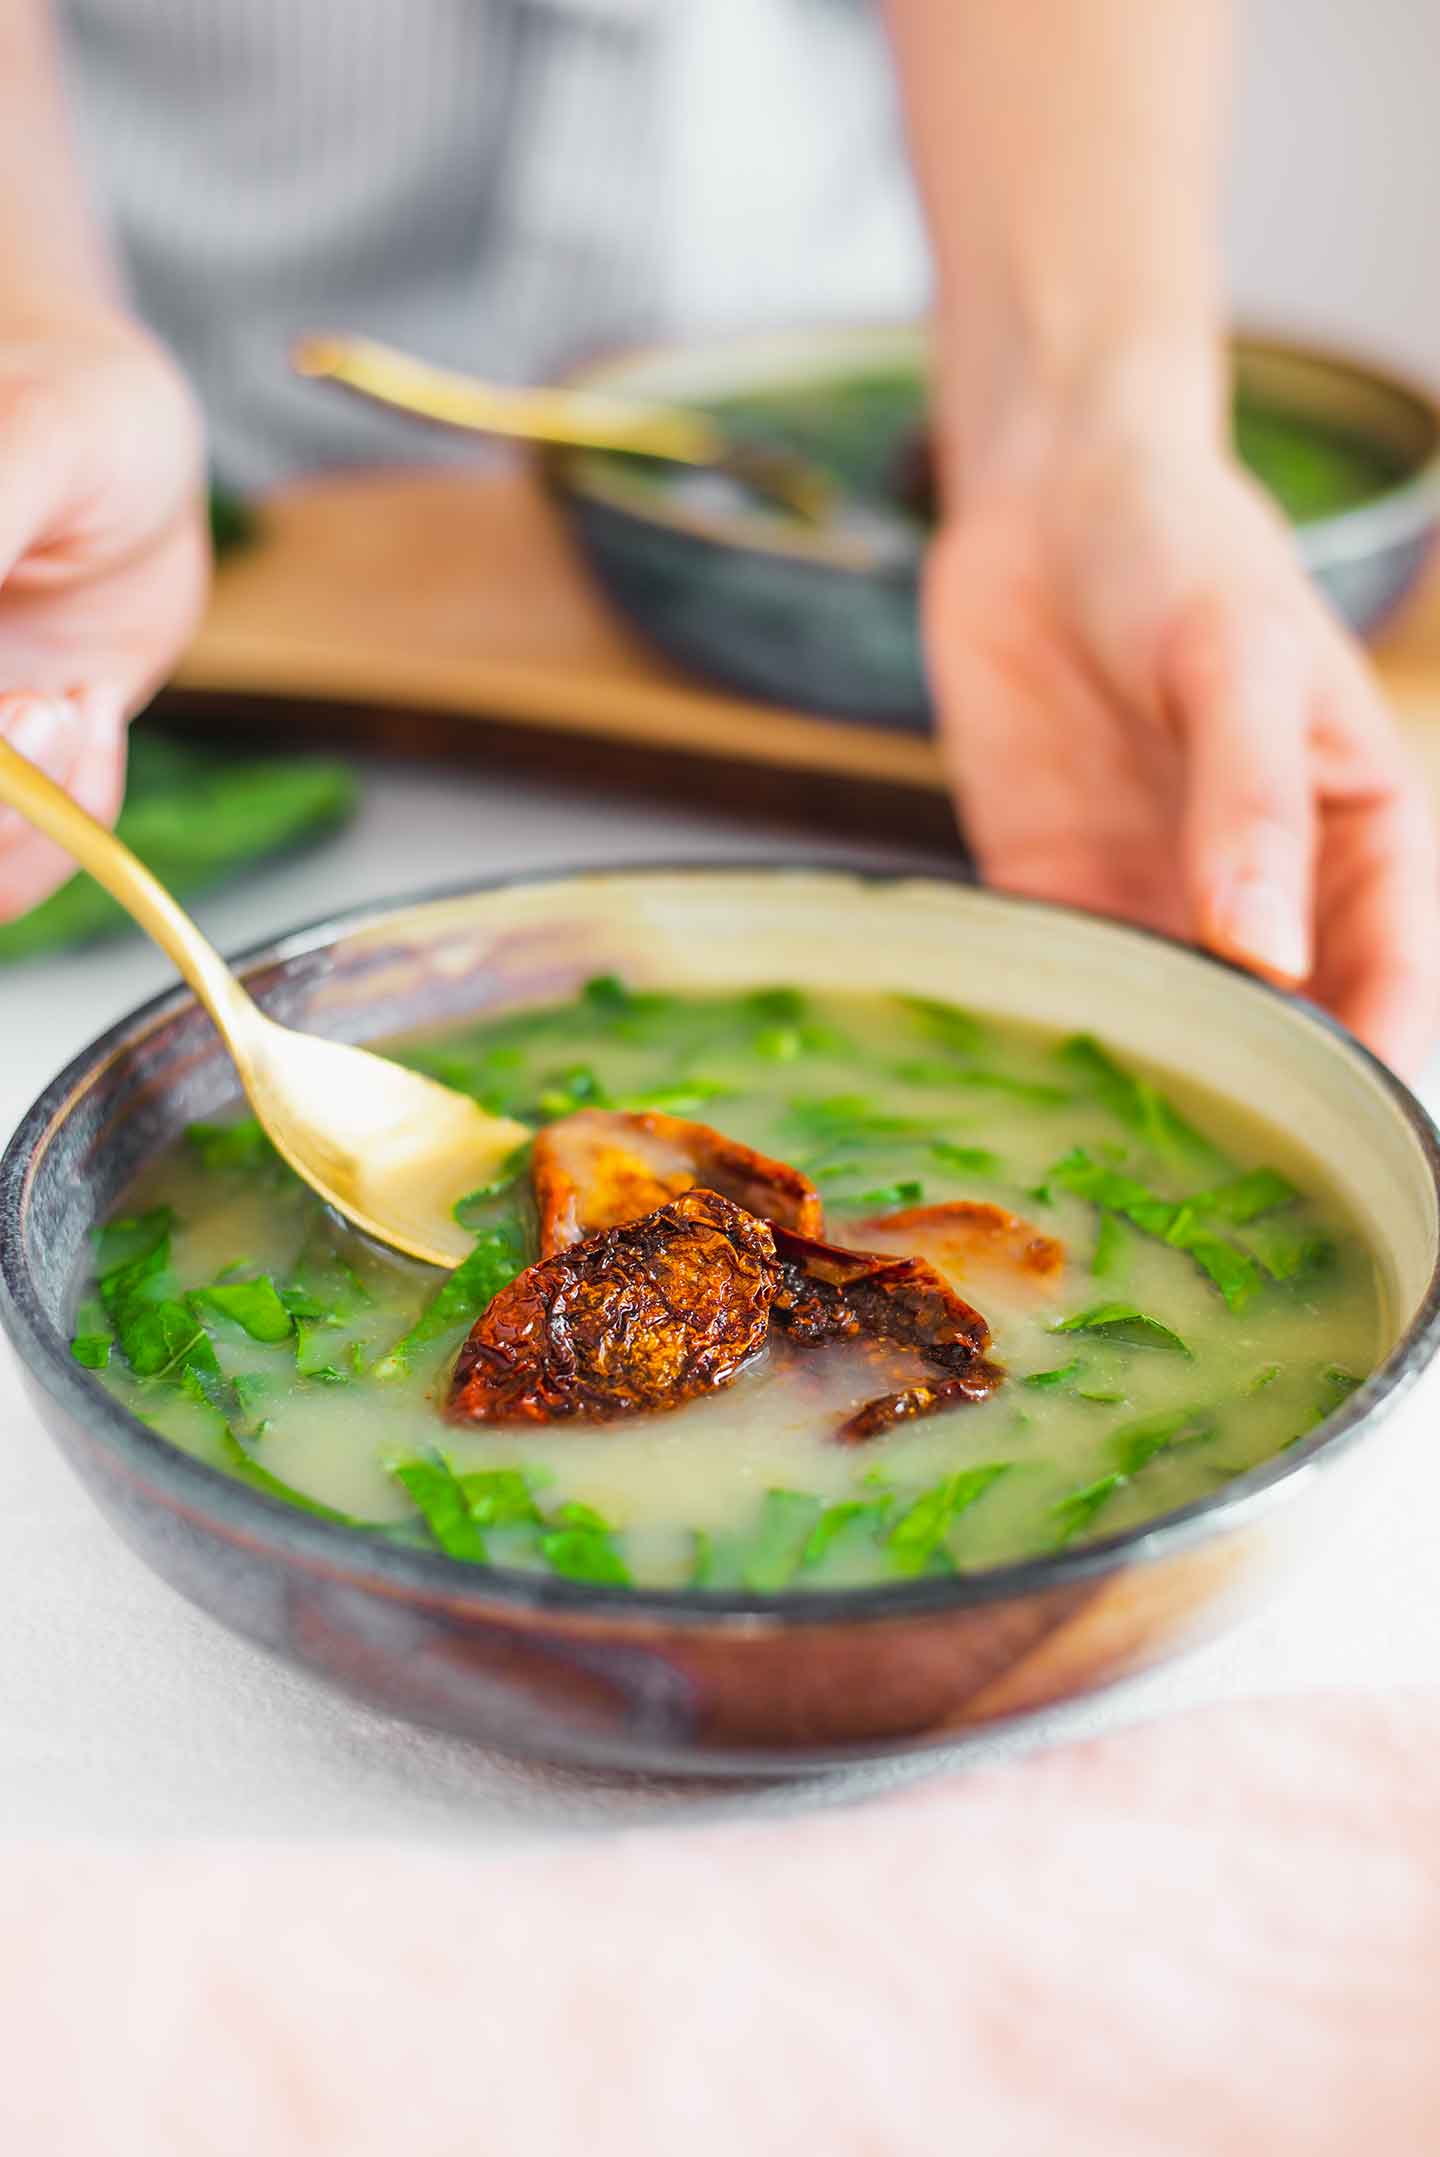 Side view of a hand holding a spoon and dipping it into the vegan Portuguese collard soup. Collard greens swirl in the broth and smoky sun-dried tomatoes garnish the top.